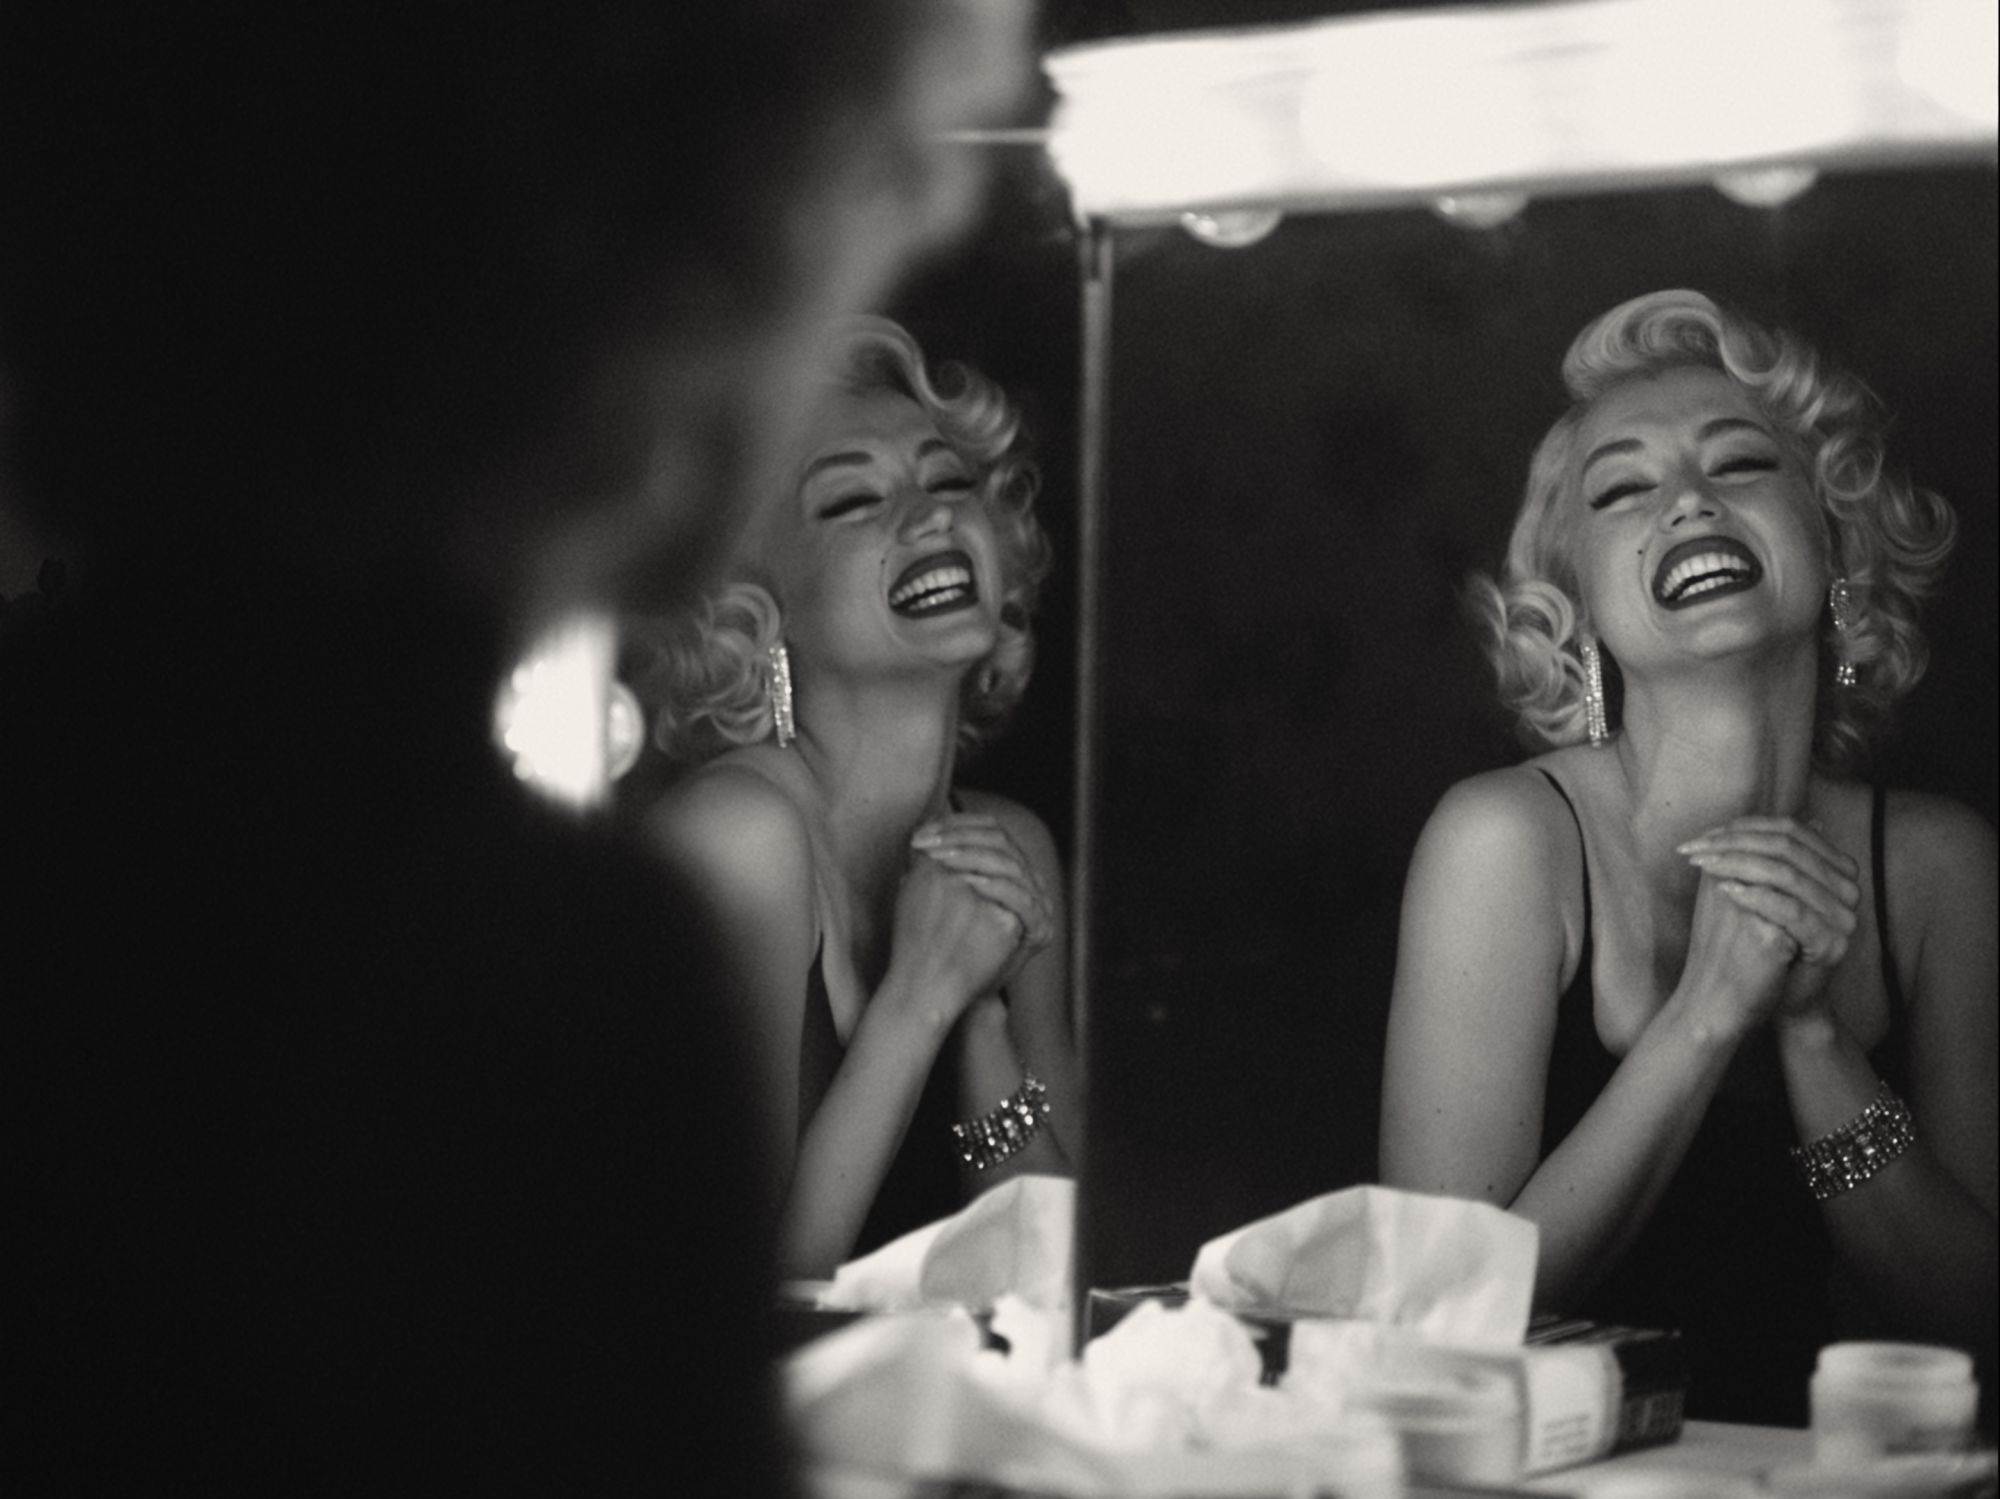 The Best Marilyn Monroe Books to Read After Seeing 'Blonde